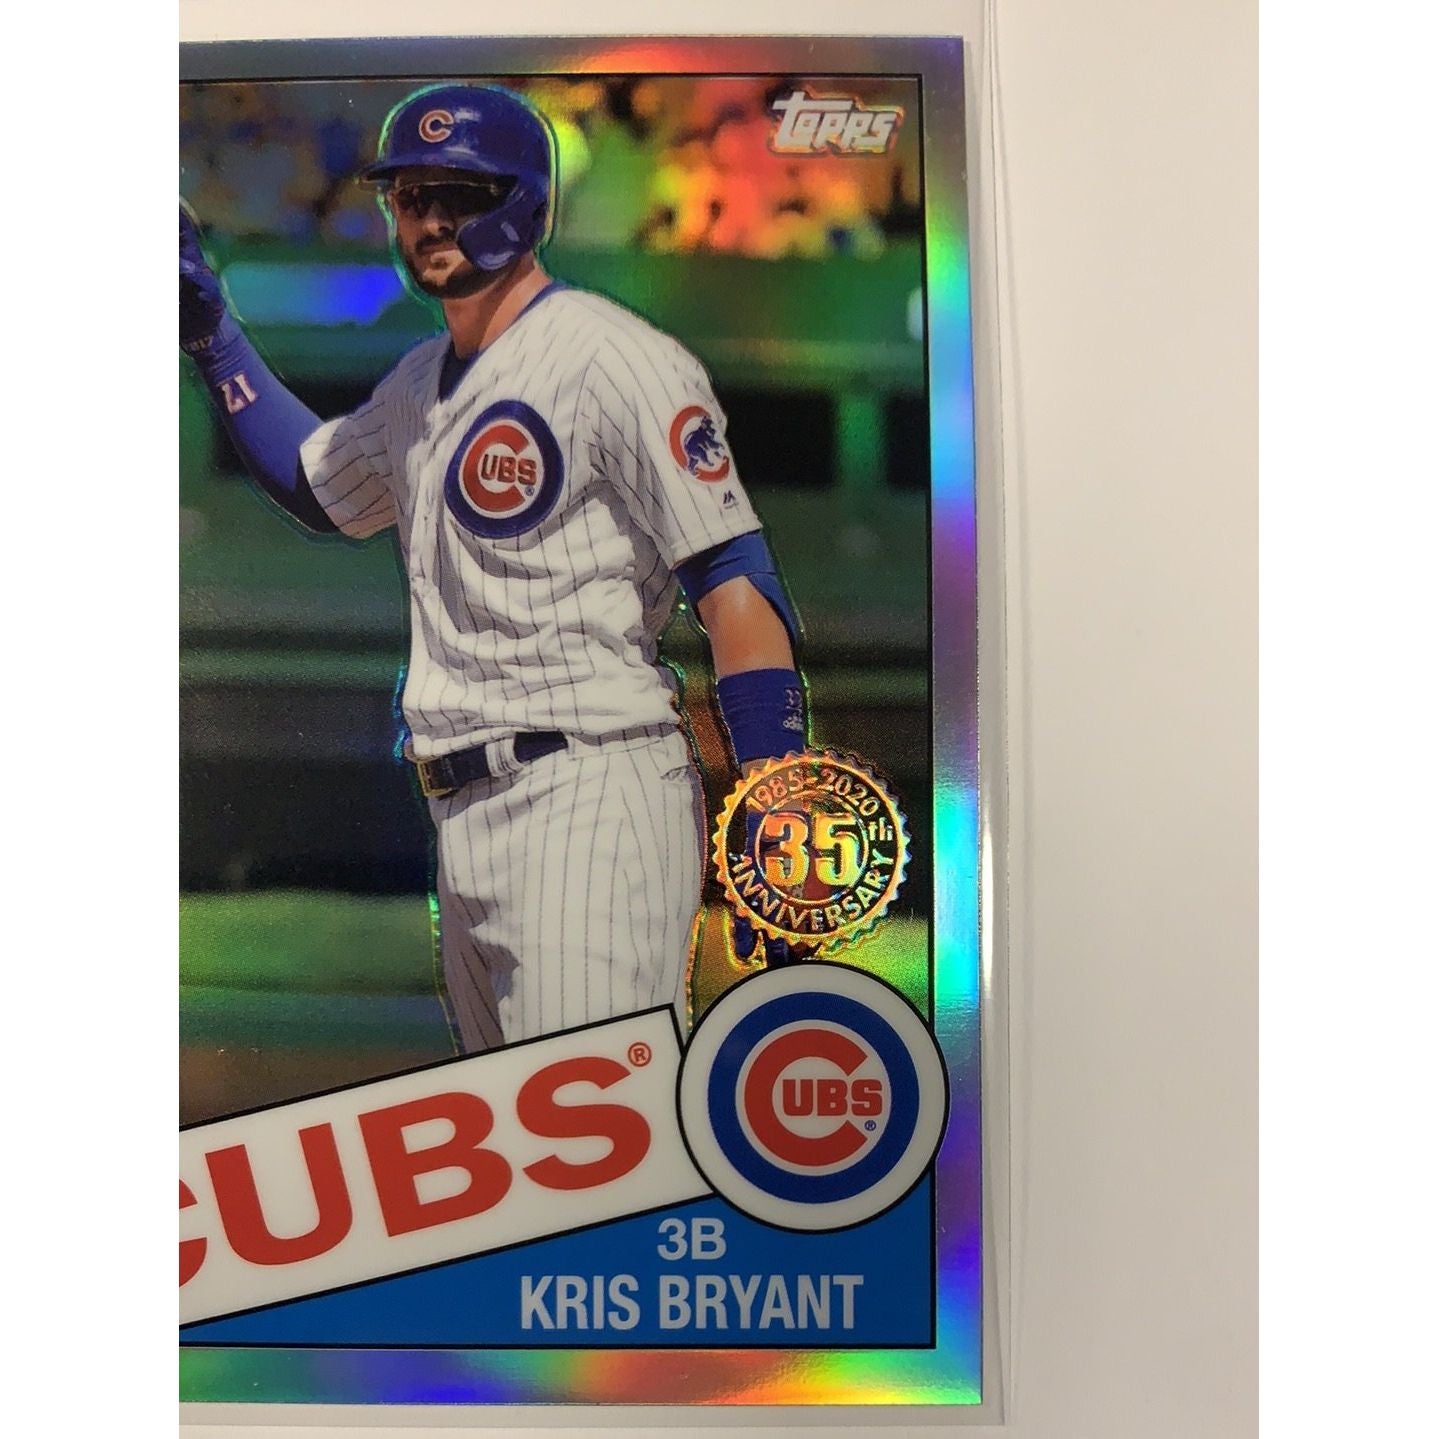  2020 Topps 35th Anniversary Kris Bryant Chrome Refractor  Local Legends Cards & Collectibles